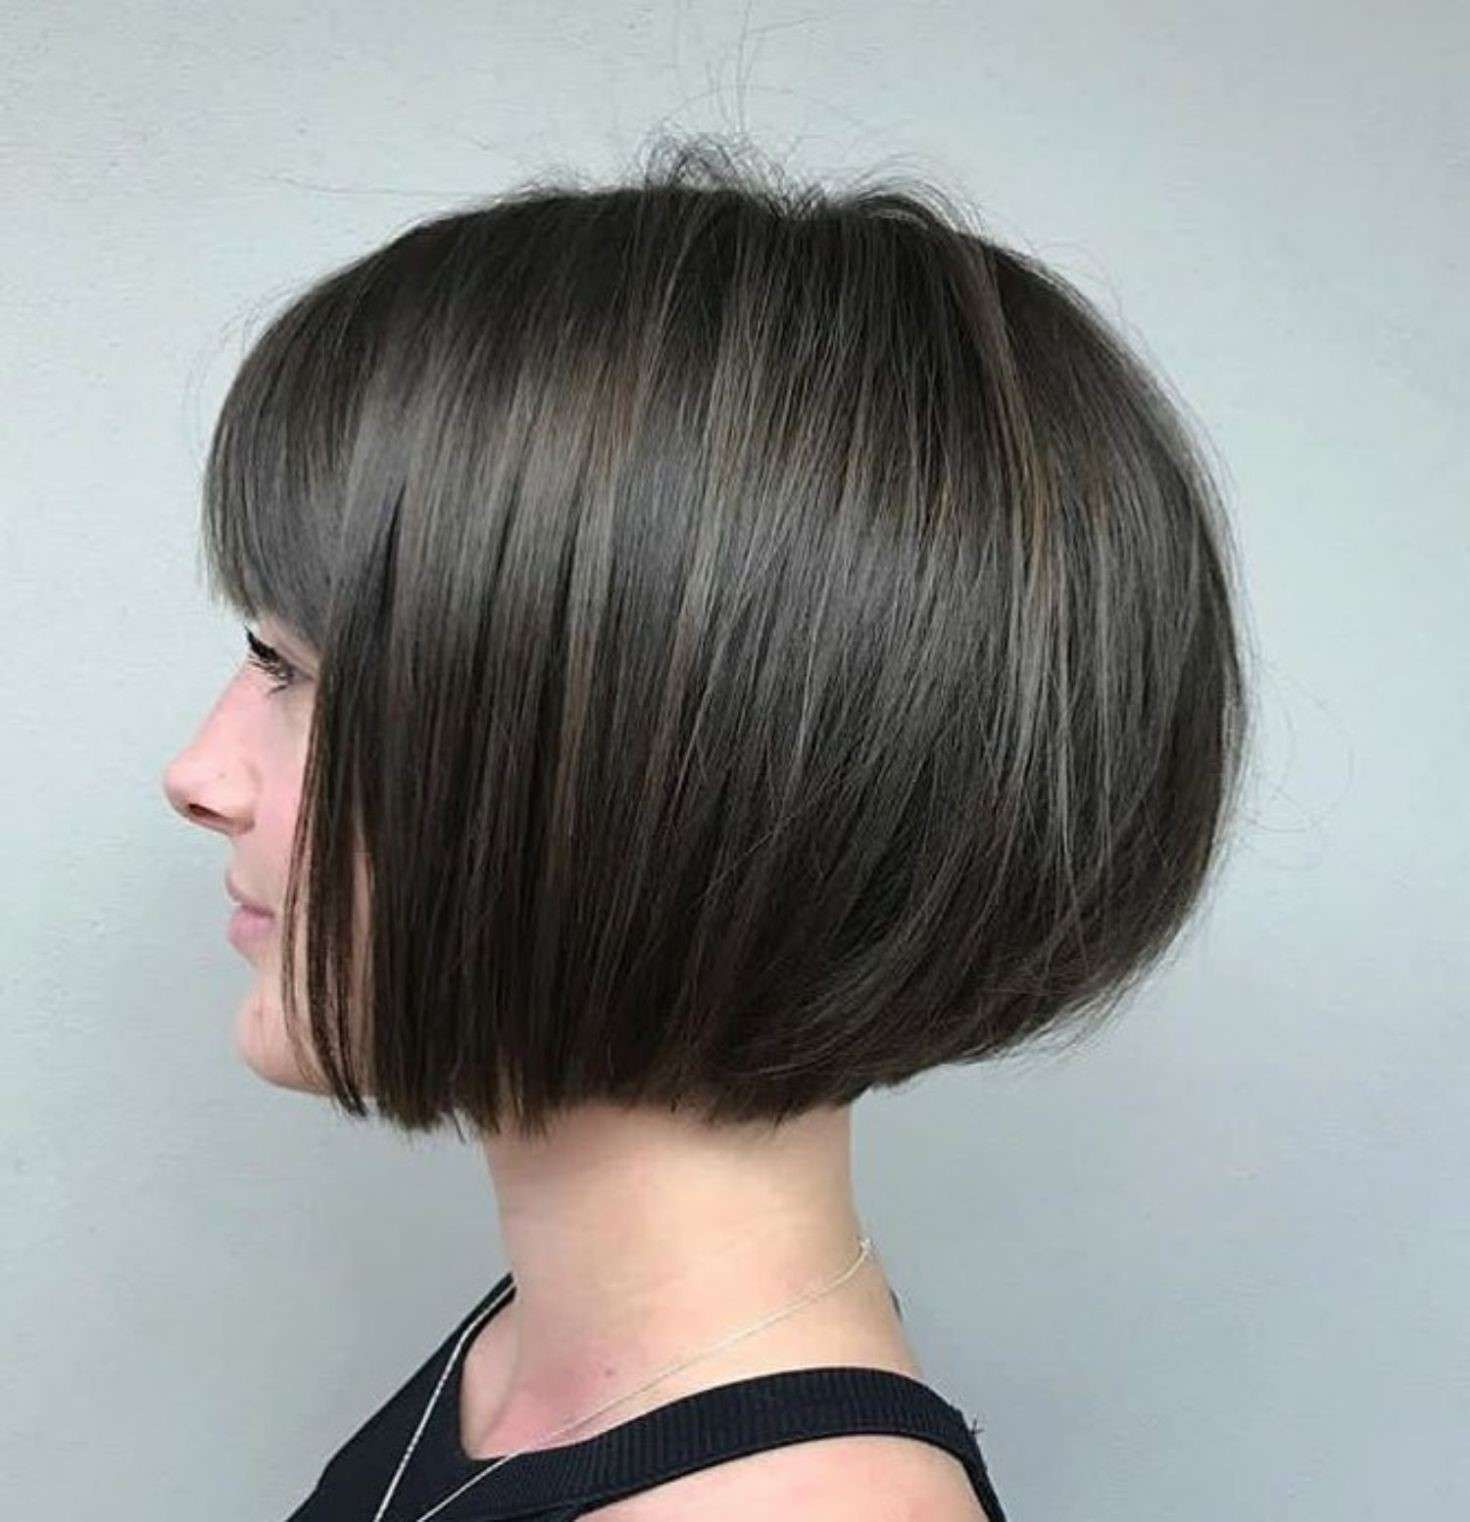 Inverted bob with bangs